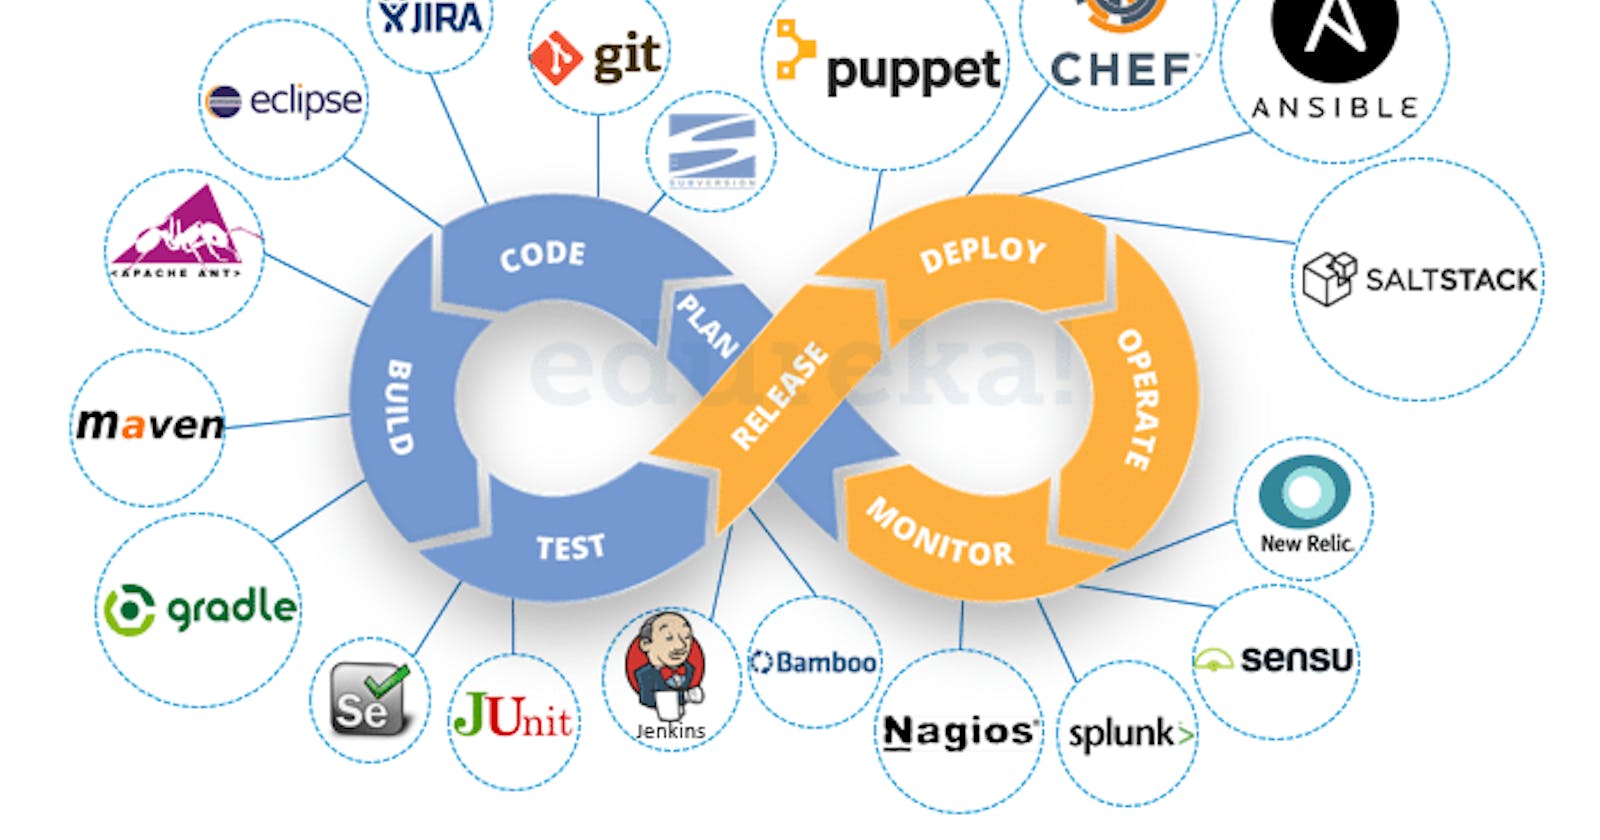 Exploring the Different DevOps Tools and Their Use Cases